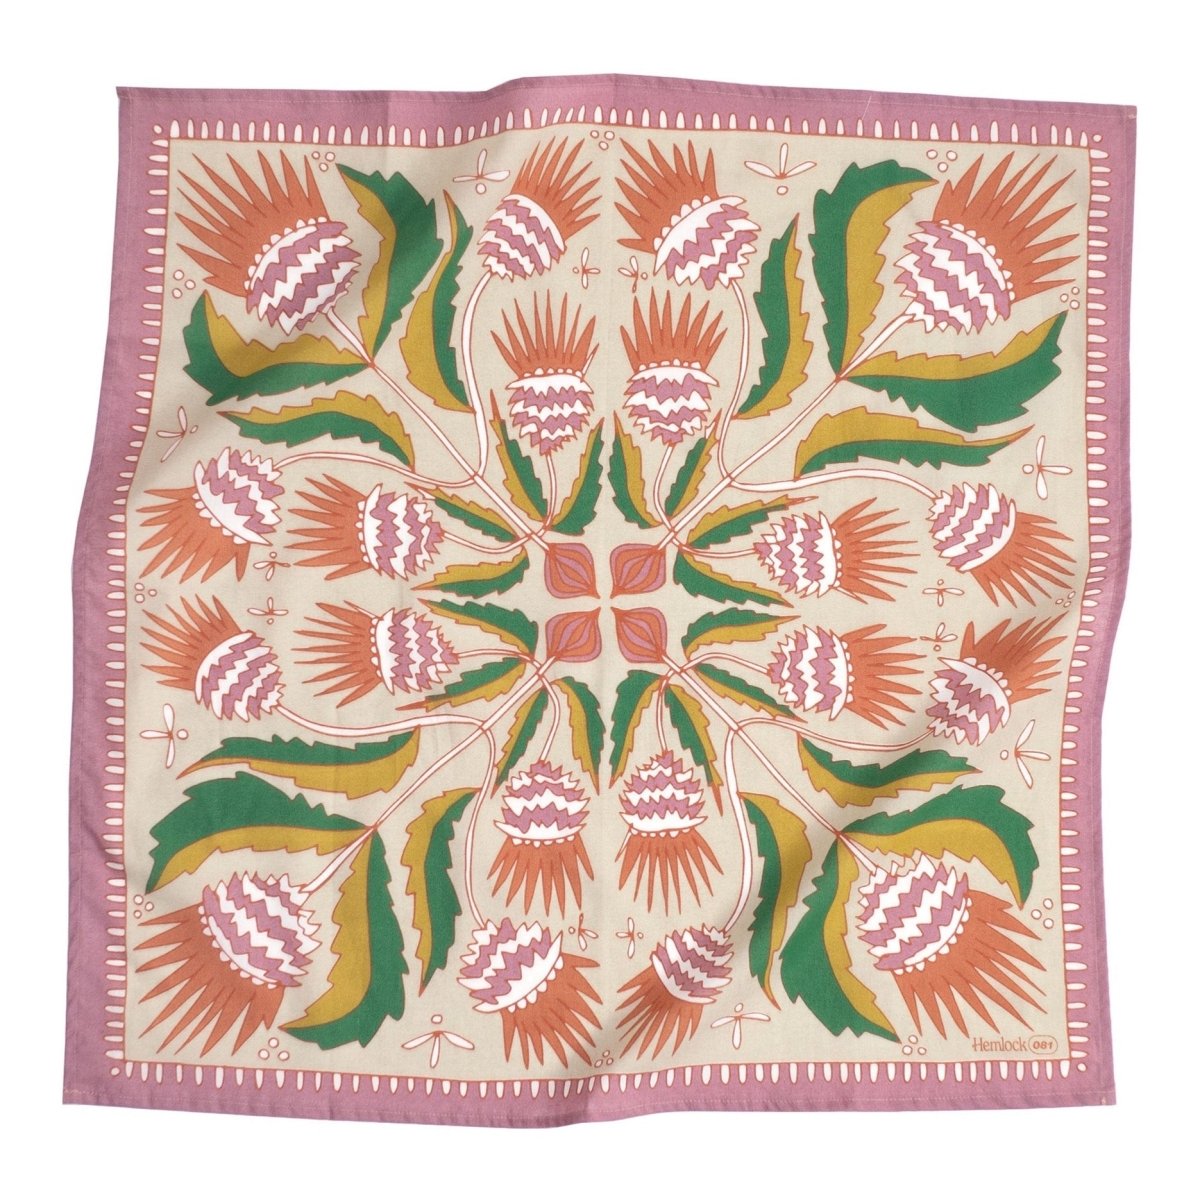 A pink, green, red and yellow bandana with floral and leaf illustrations. Designed by Hemlock Goods in Fulton, MO and screen printed by hand in India.